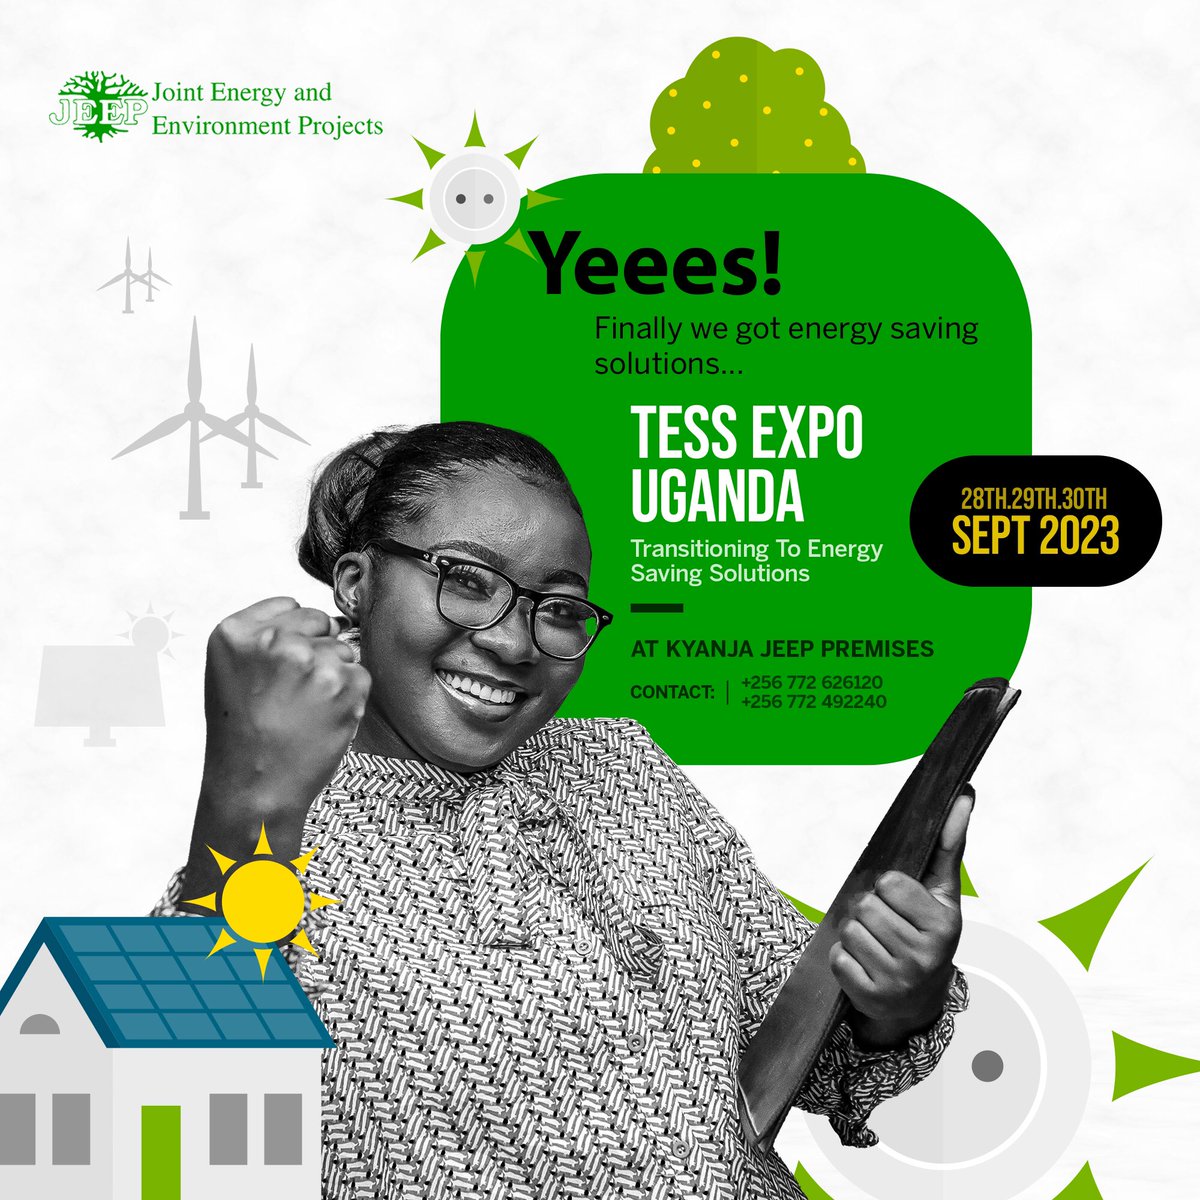 #BeNotified : A call 📞 for Innovators  Green Exhibitors and Environmentalists

 Yes the solutions are here now 

Transition to Energy Saving Solutions (TESS) is Set for 28th-29th Sept at Joint Energy and Environment projects Kyanja #GoGreenUg